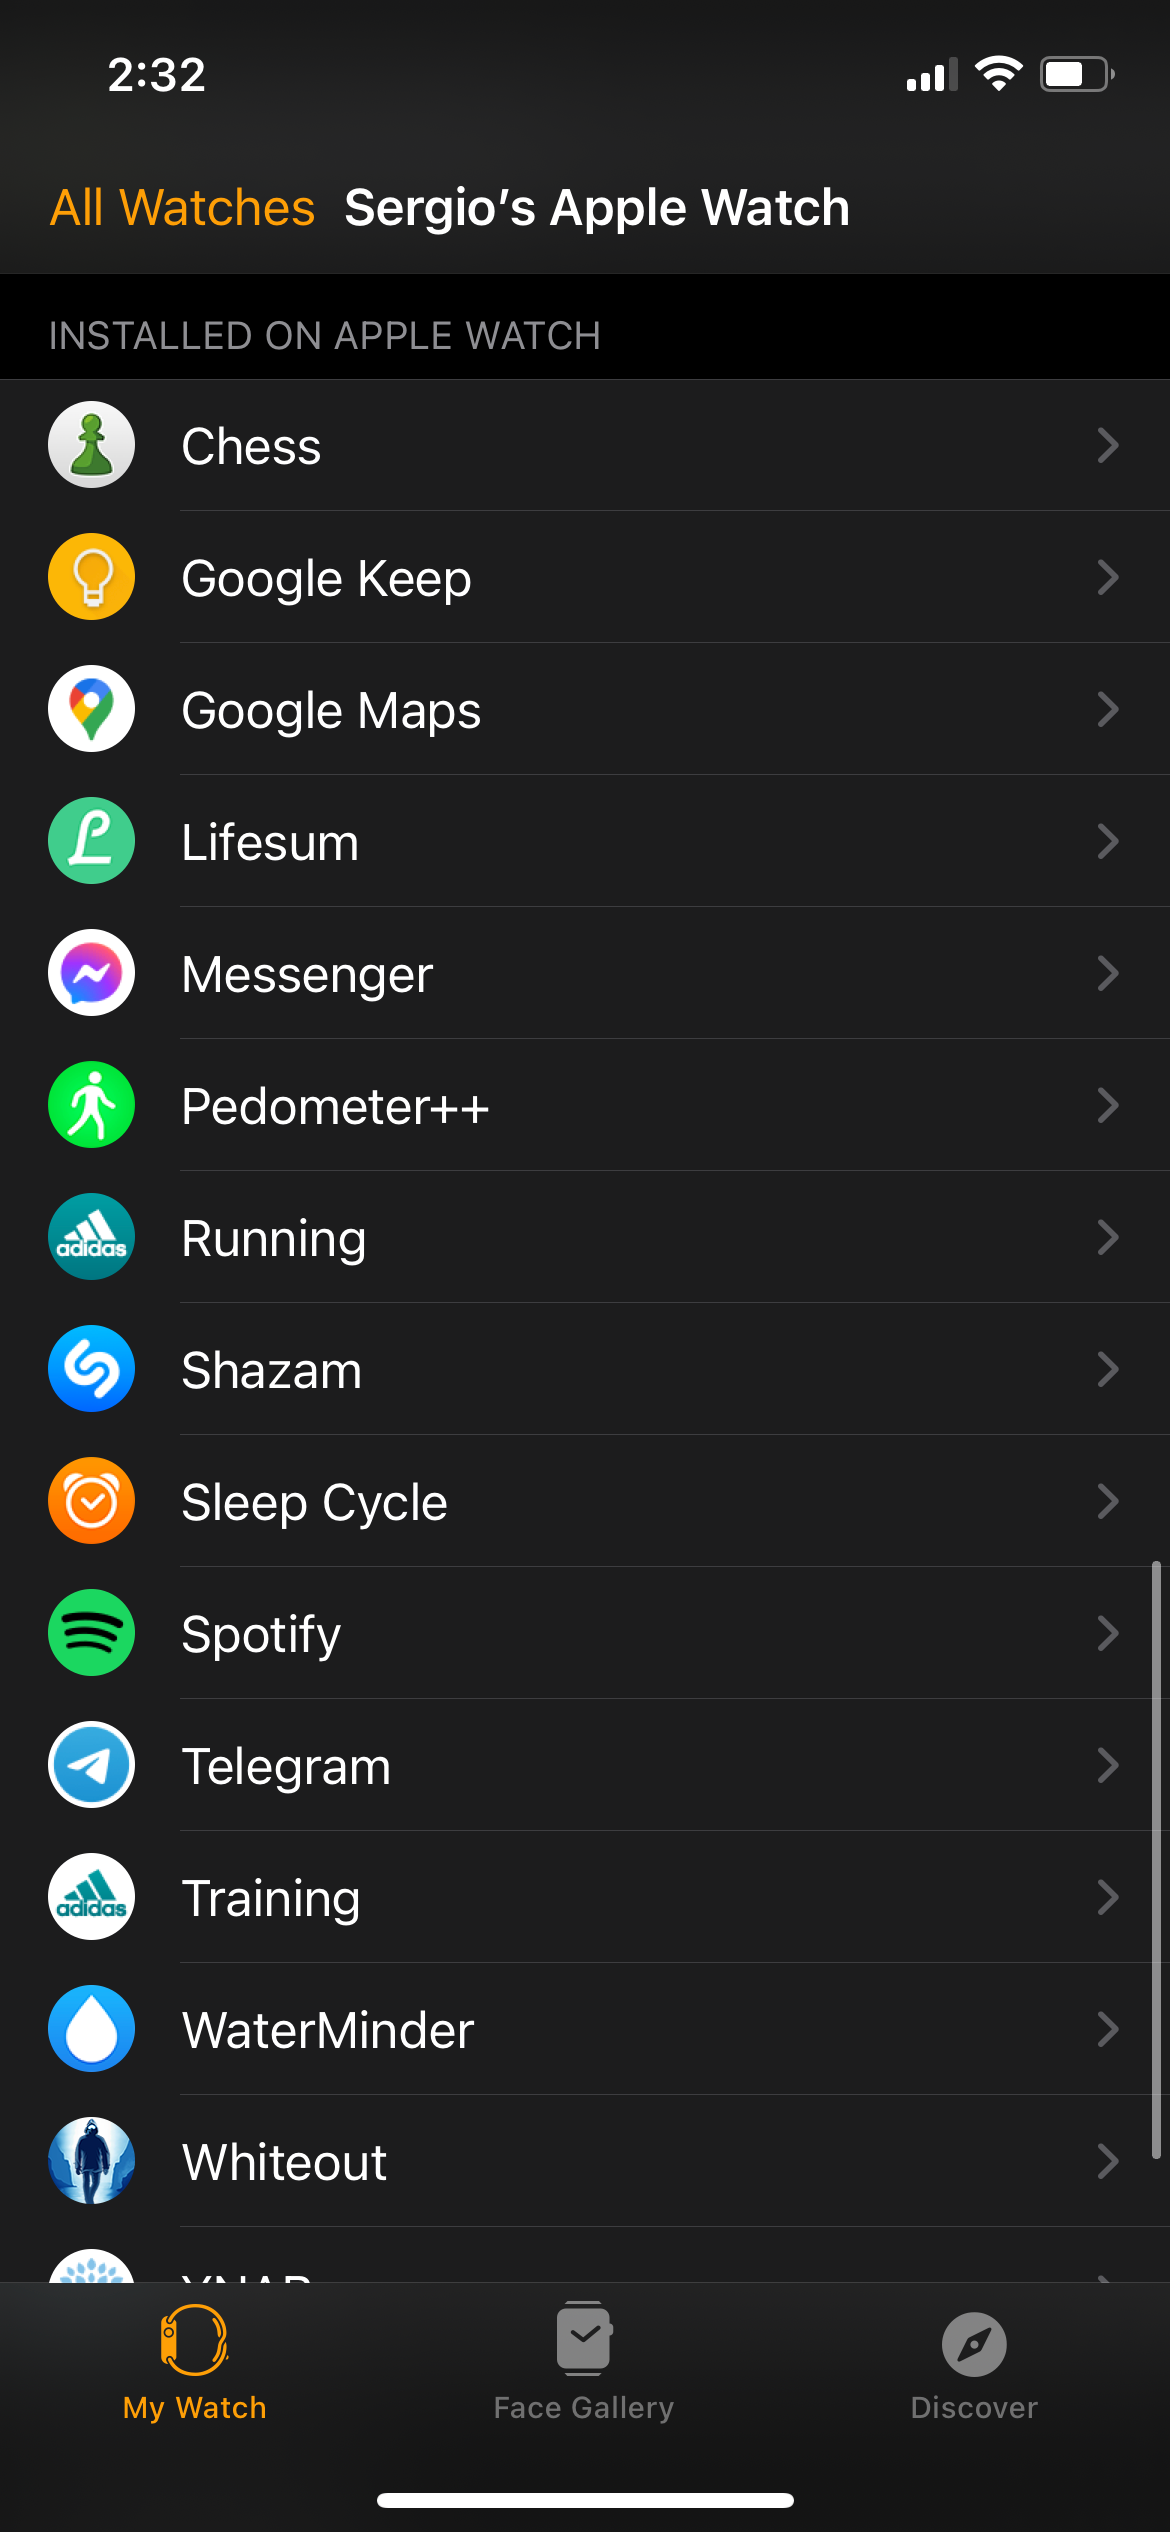 List of apps installed on the Apple Watch from iPhone.